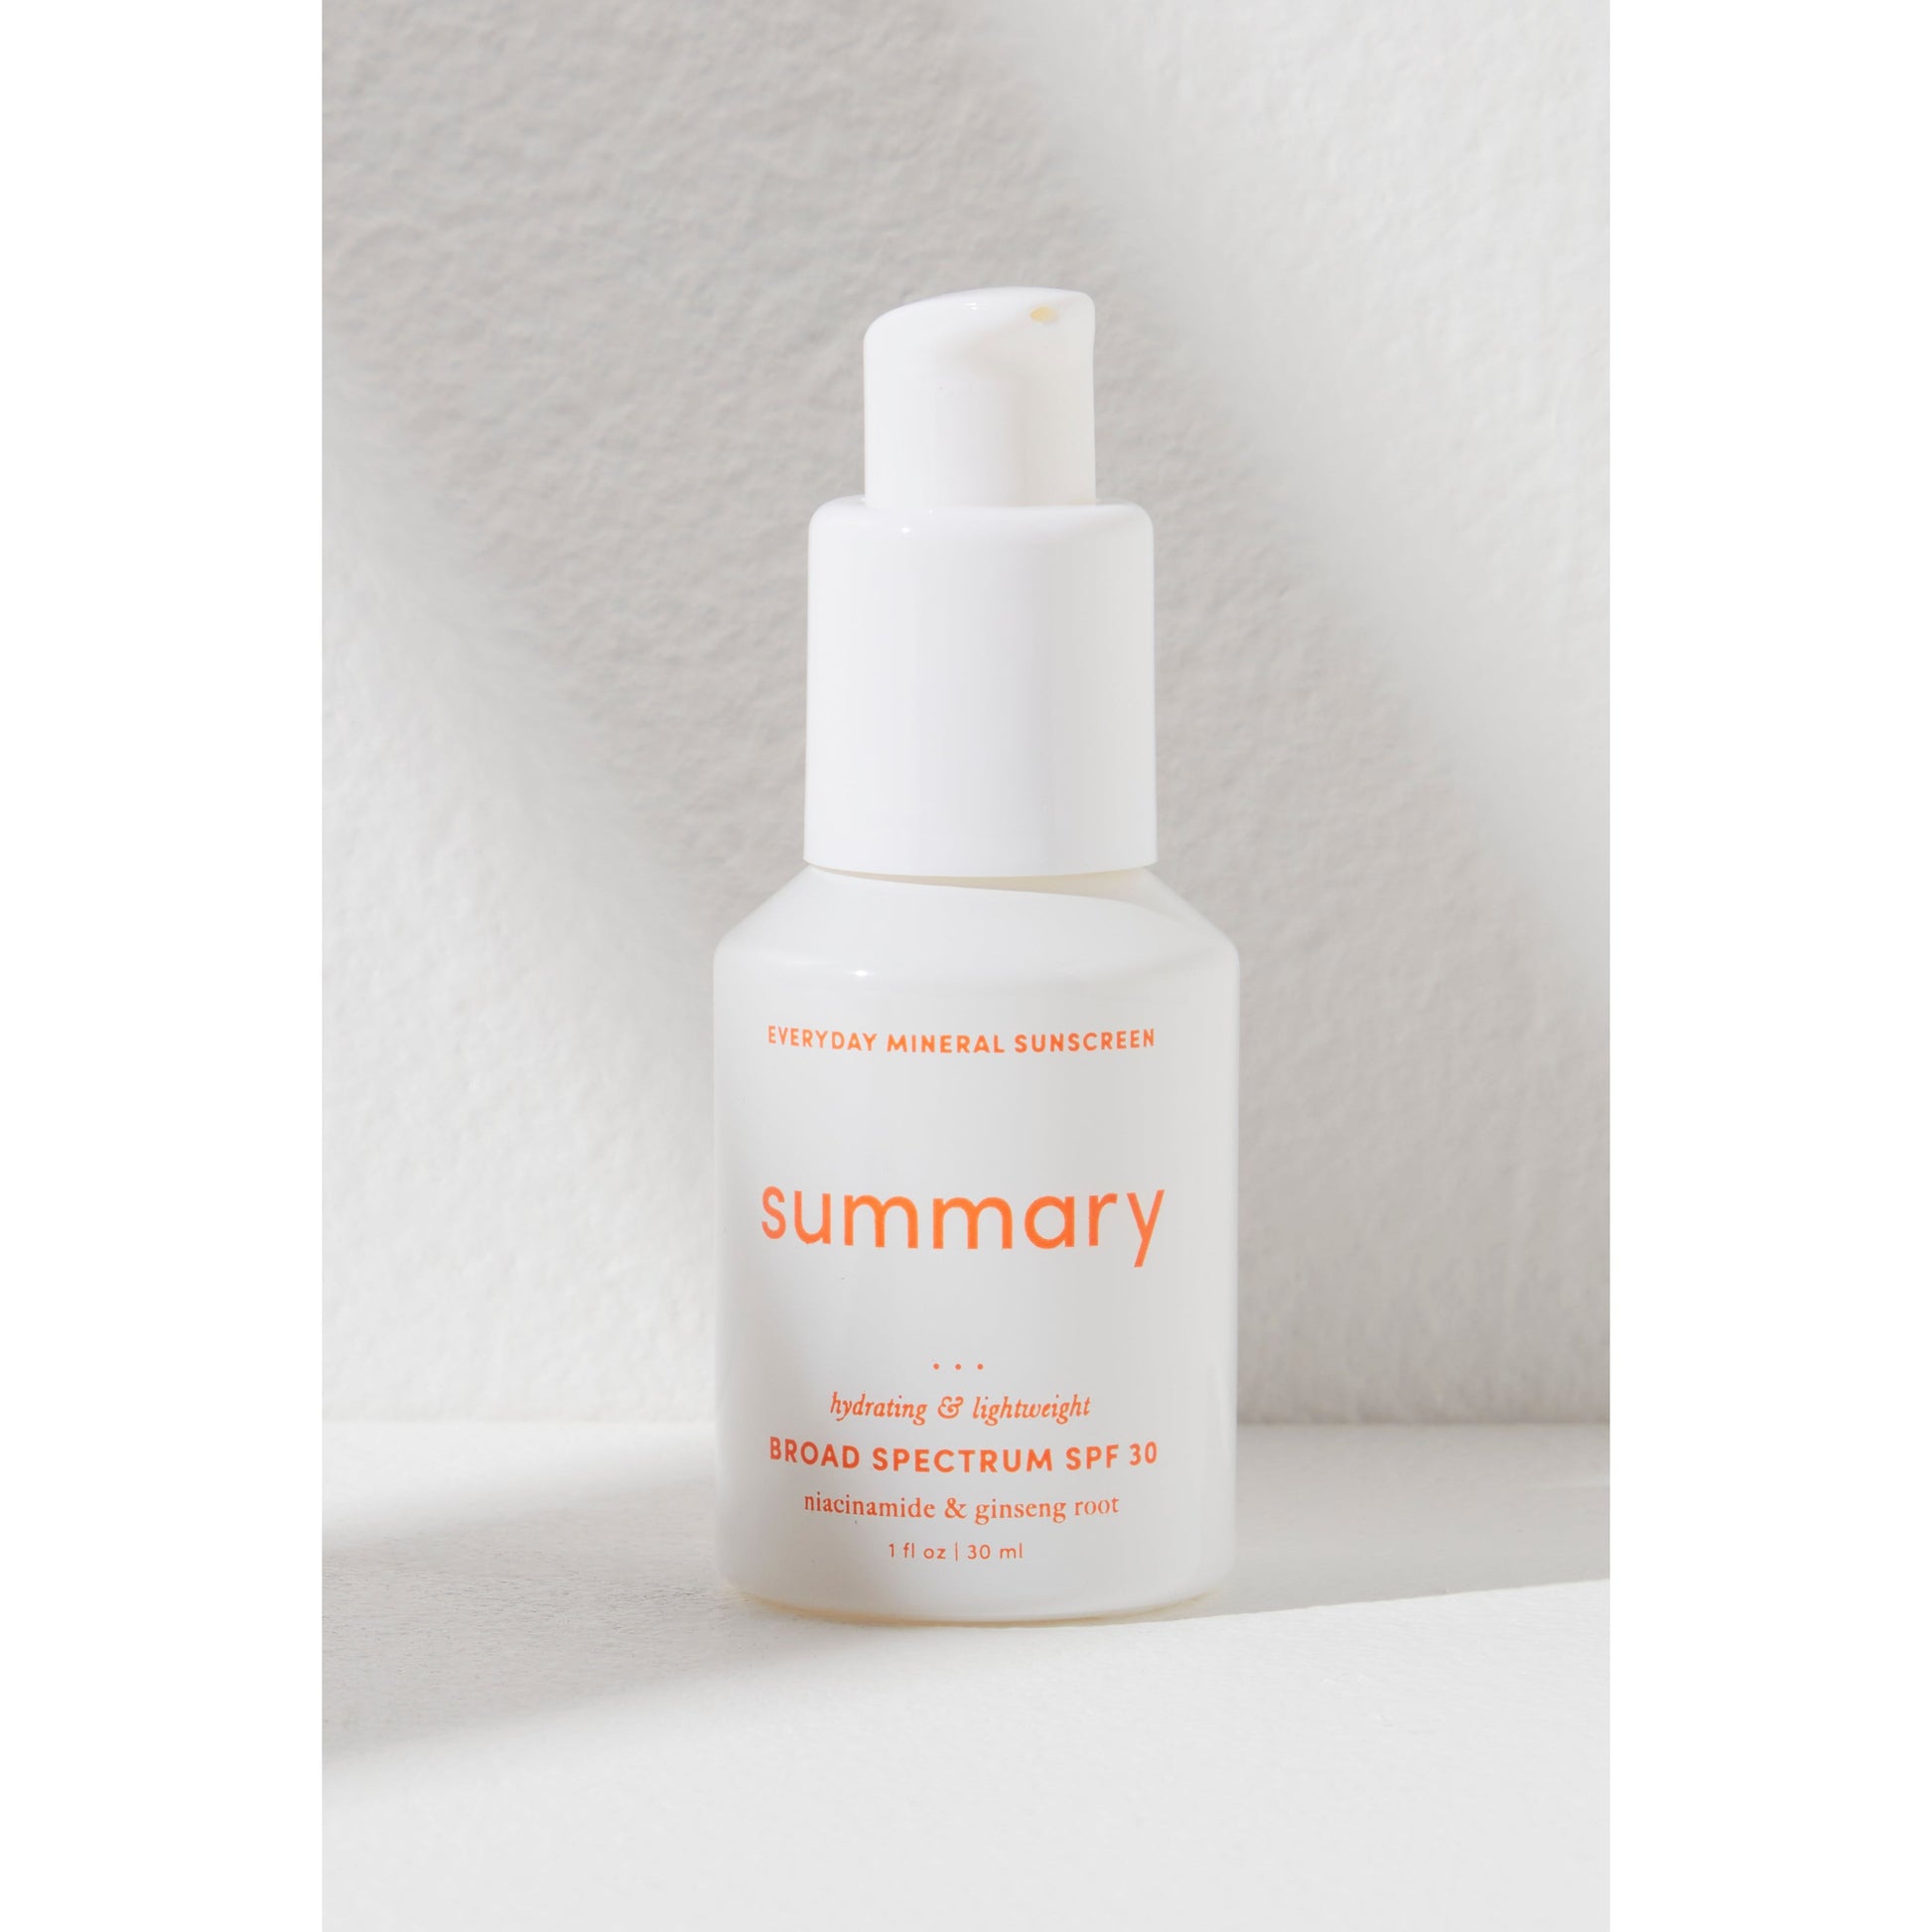 Bottle of Summary SPF 30 mineral-based sunscreen by Free People Movement on a light textured background.